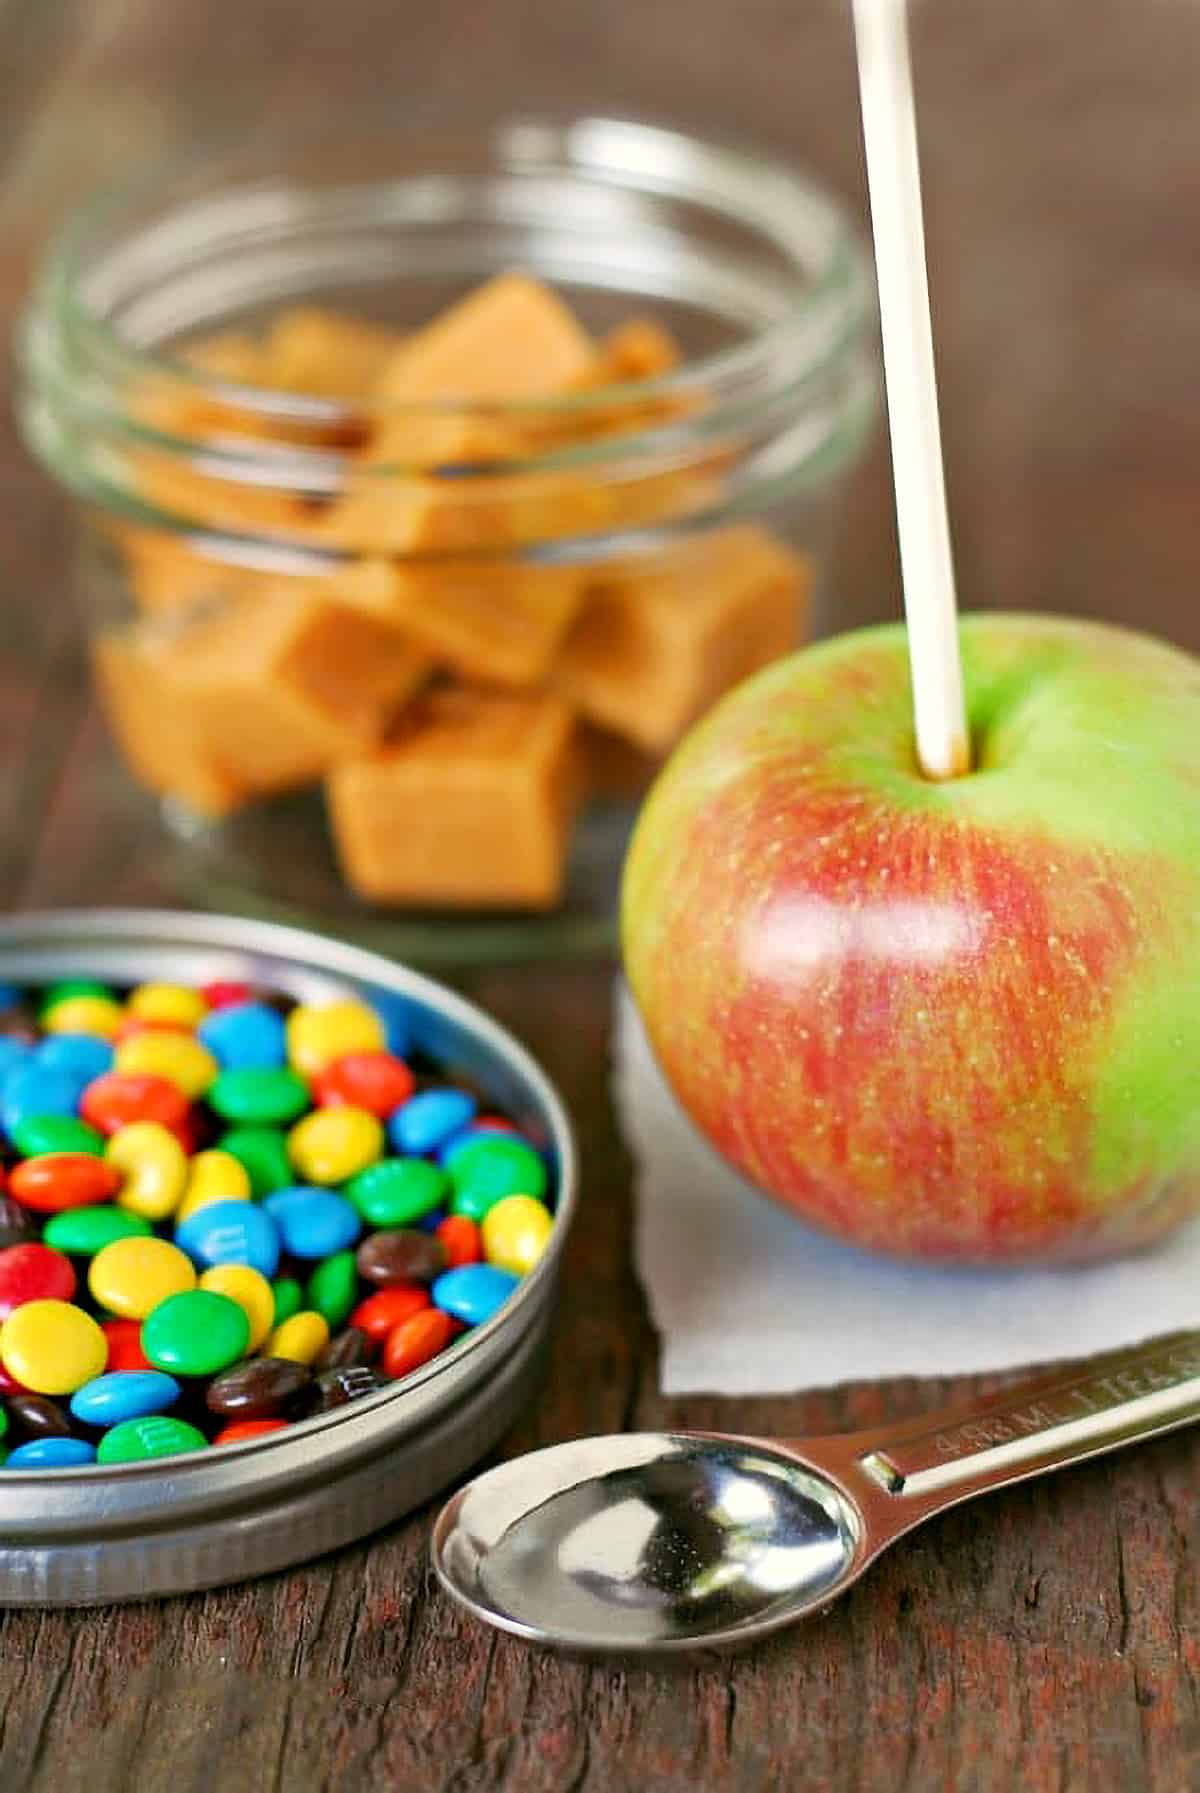 Mini M&M's, caramels in a jar, an apple and a teaspoon of water.